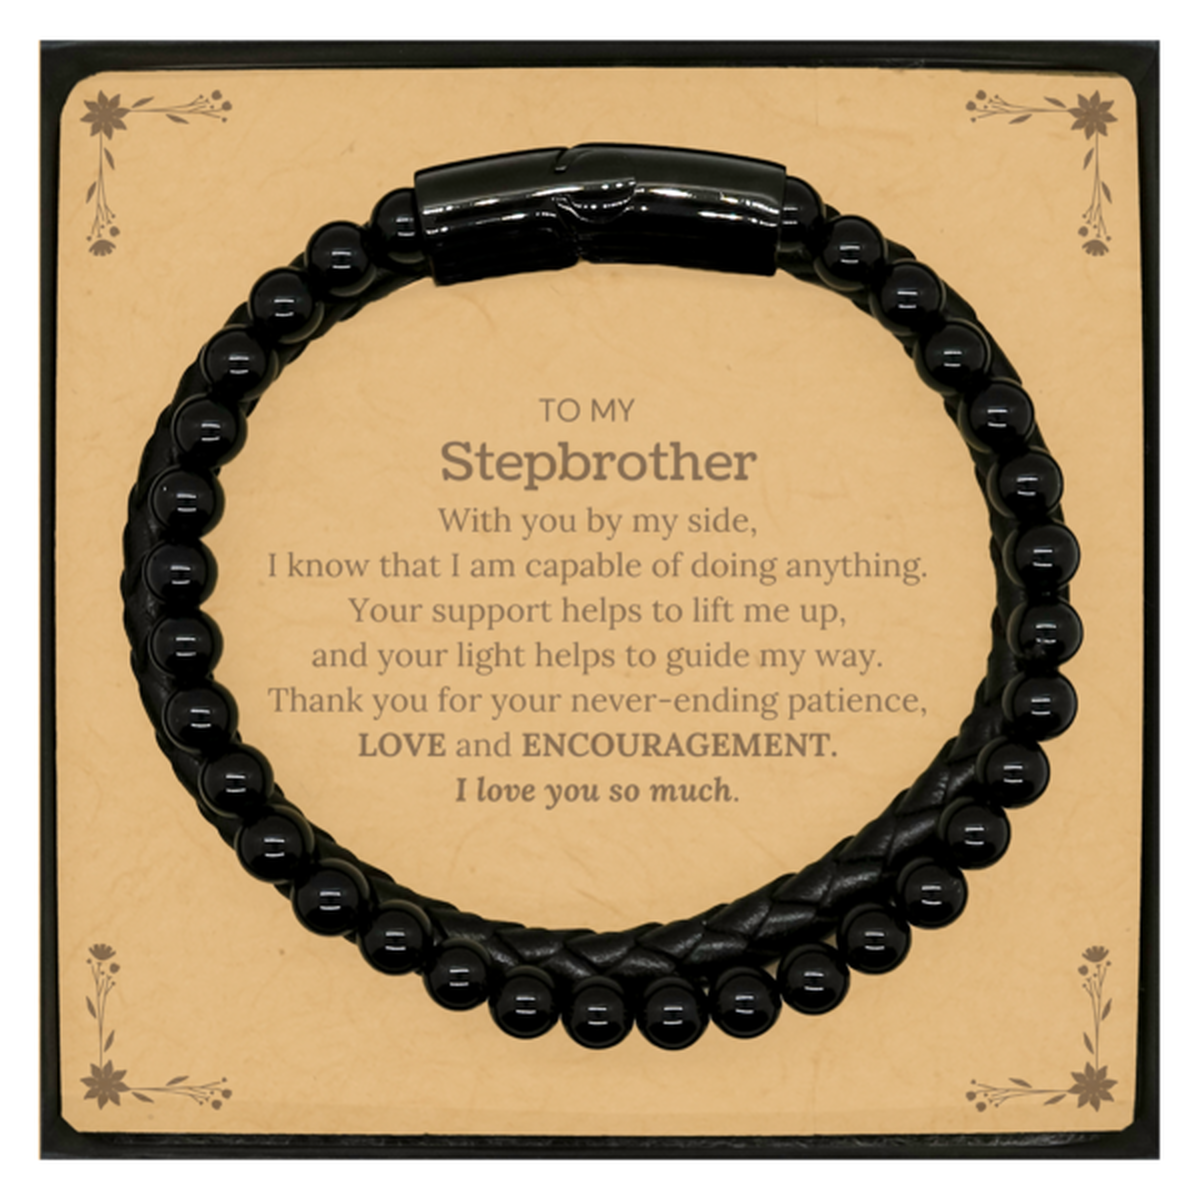 Appreciation Stepbrother Stone Leather Bracelets Gifts, To My Stepbrother Birthday Christmas Wedding Keepsake Gifts for Stepbrother With you by my side, I know that I am capable of doing anything. I love you so much